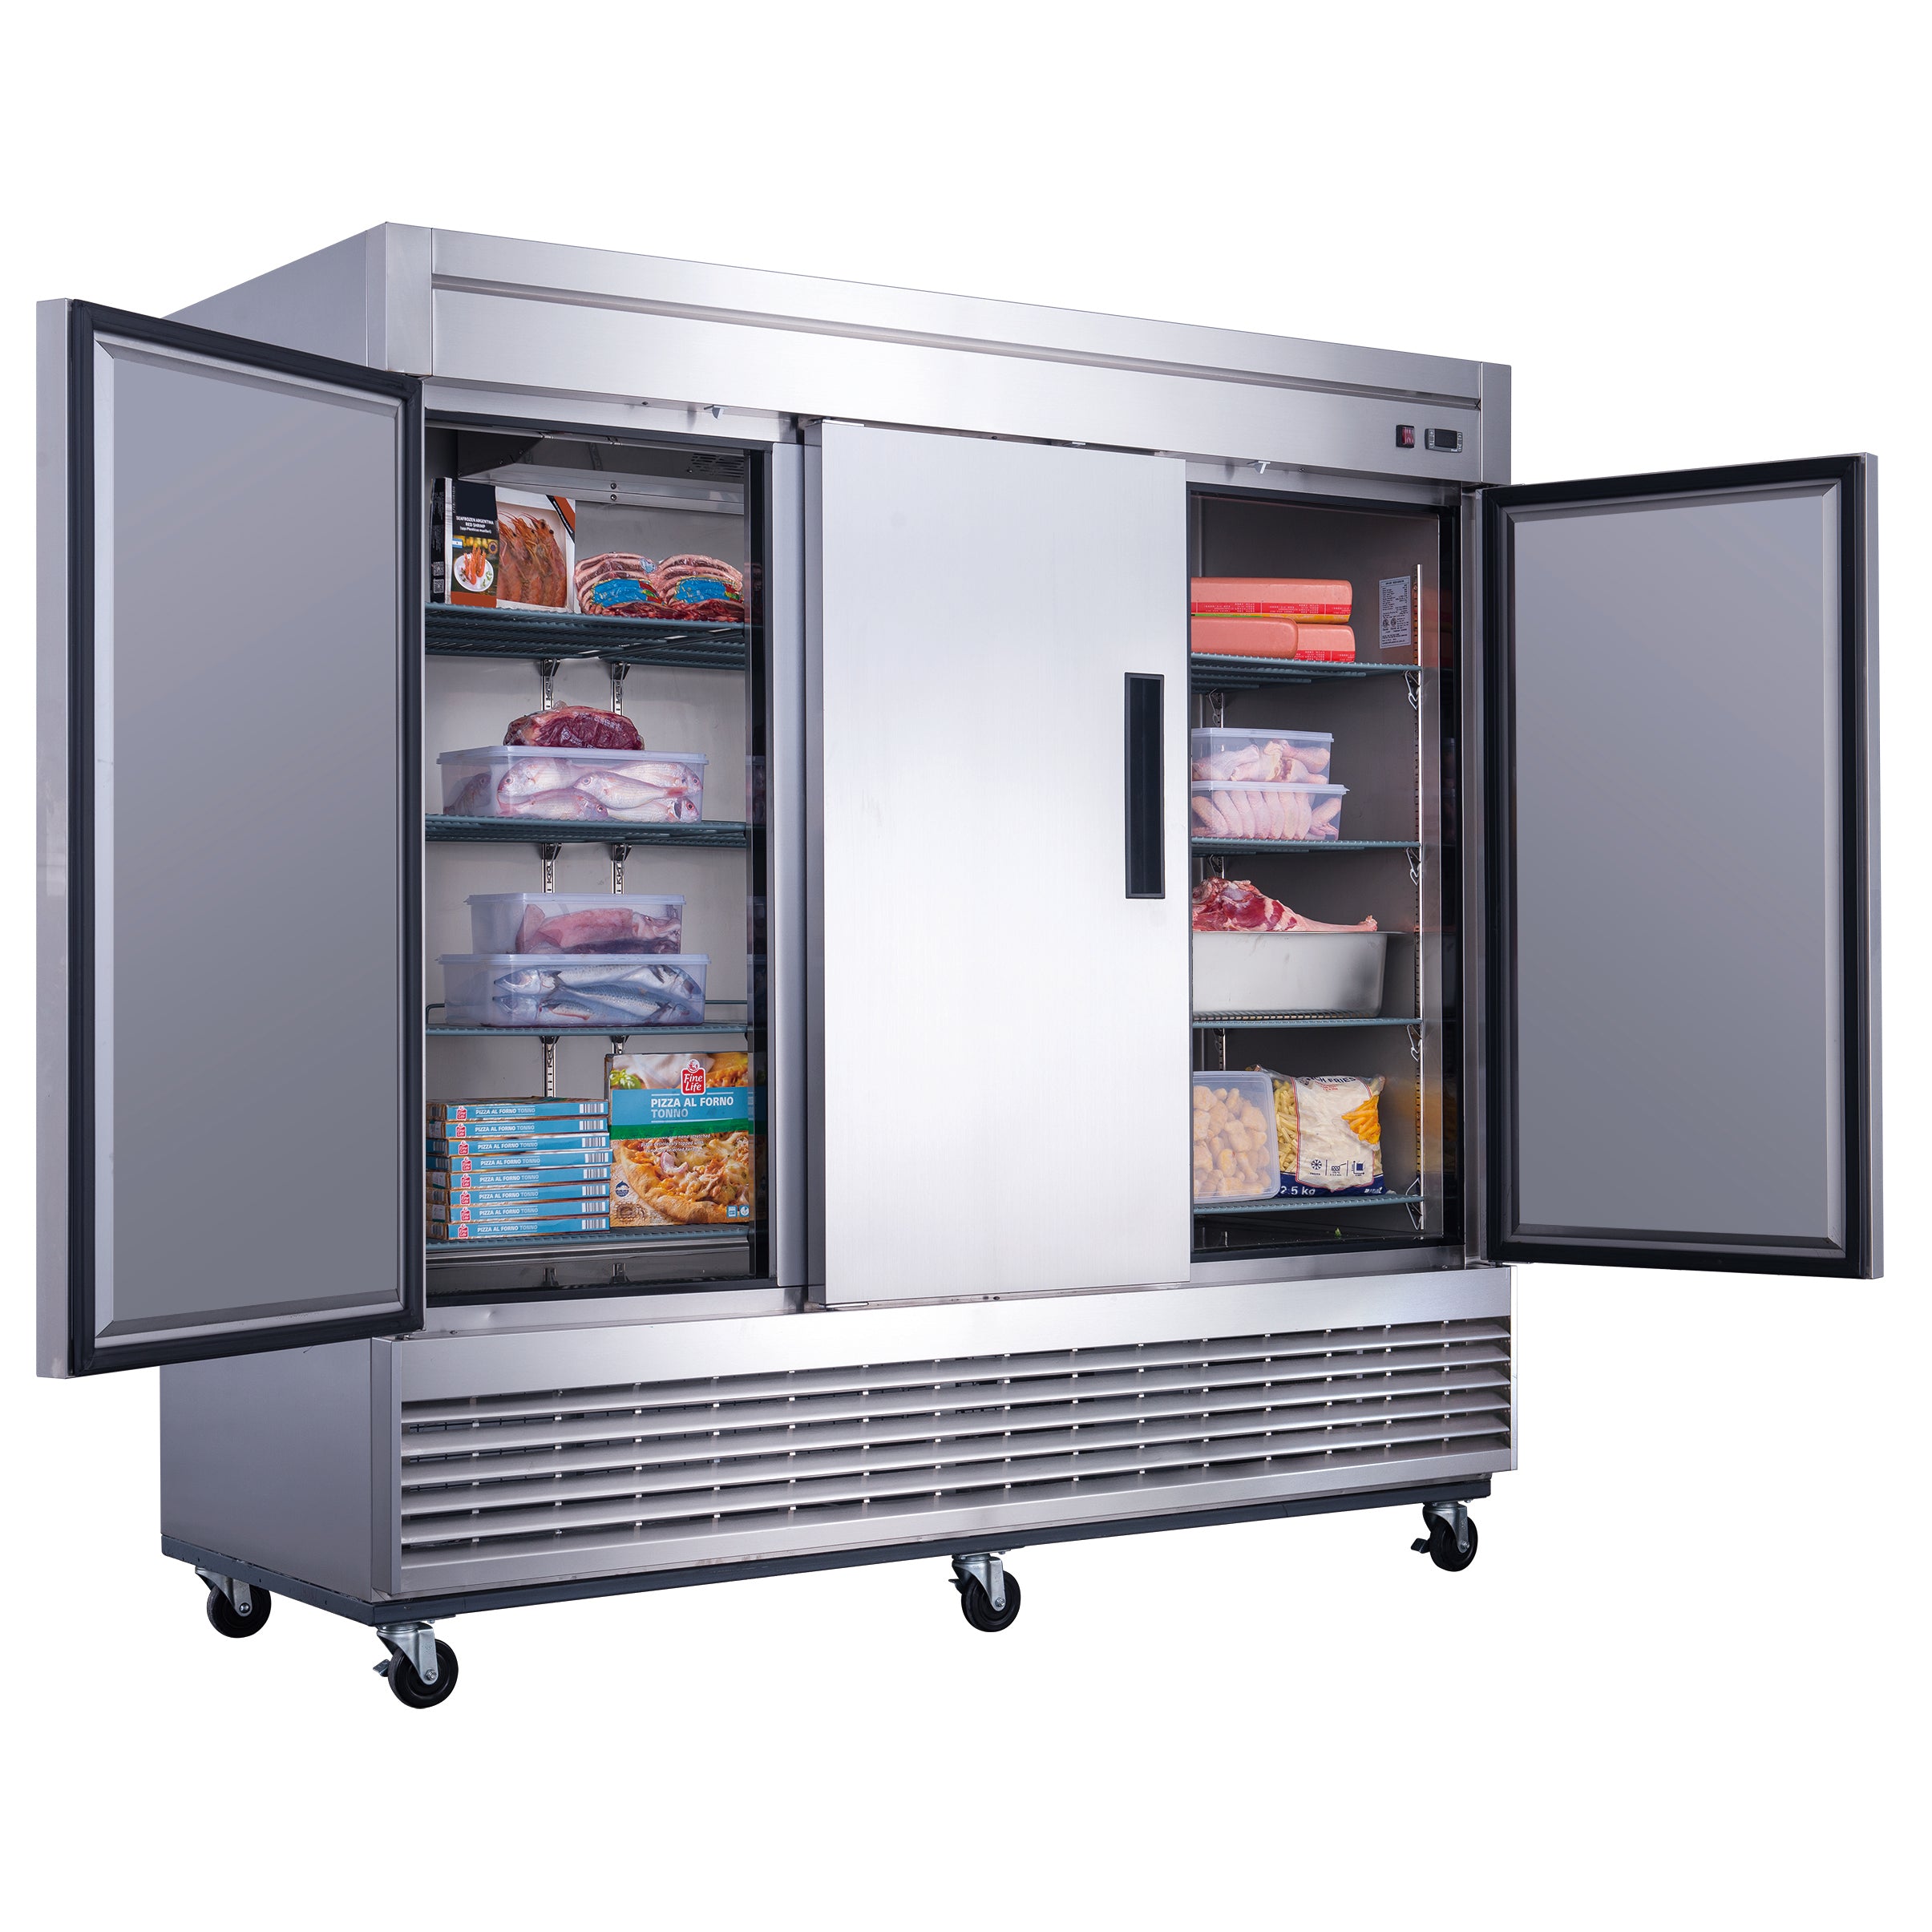 Chef AAA - T83R, Commercial 83" Reach-In Refrigerator 3 Solid Door Stainless Steel 64 cu.ft.